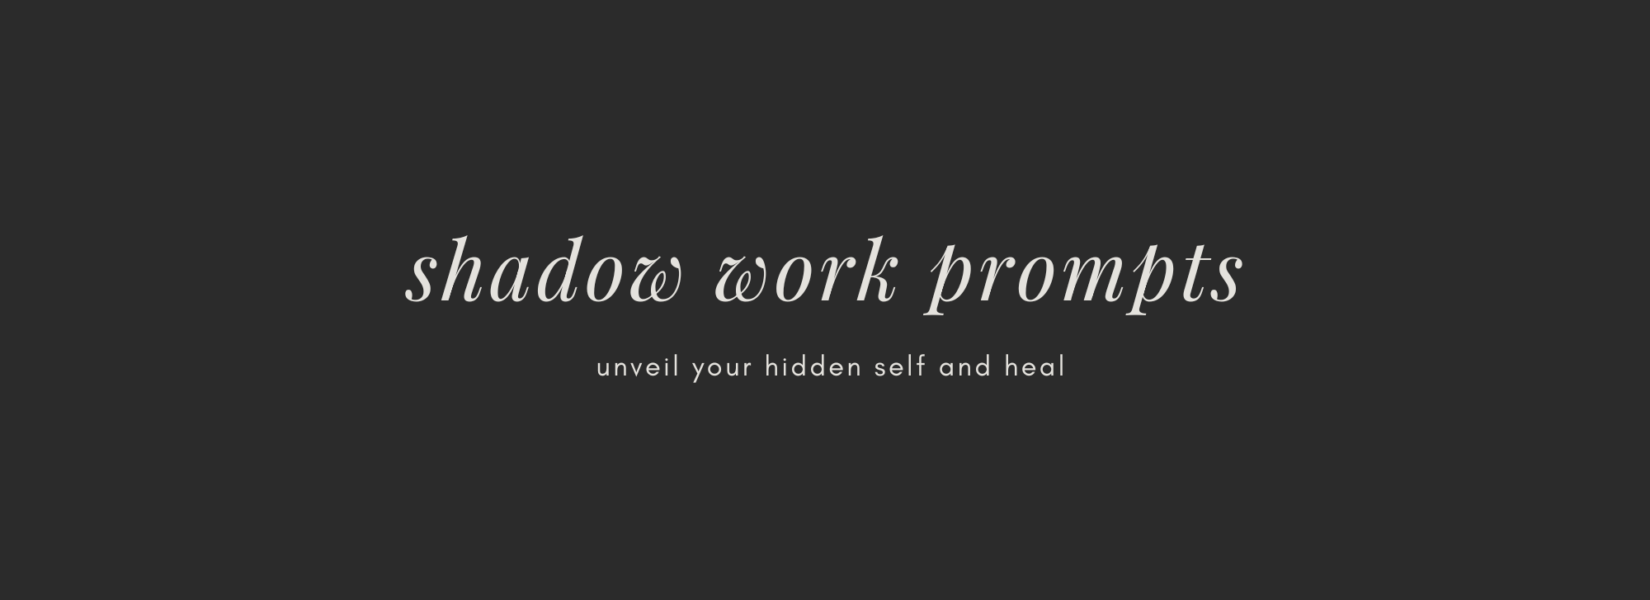 49 shadow work journal prompts for inner healing